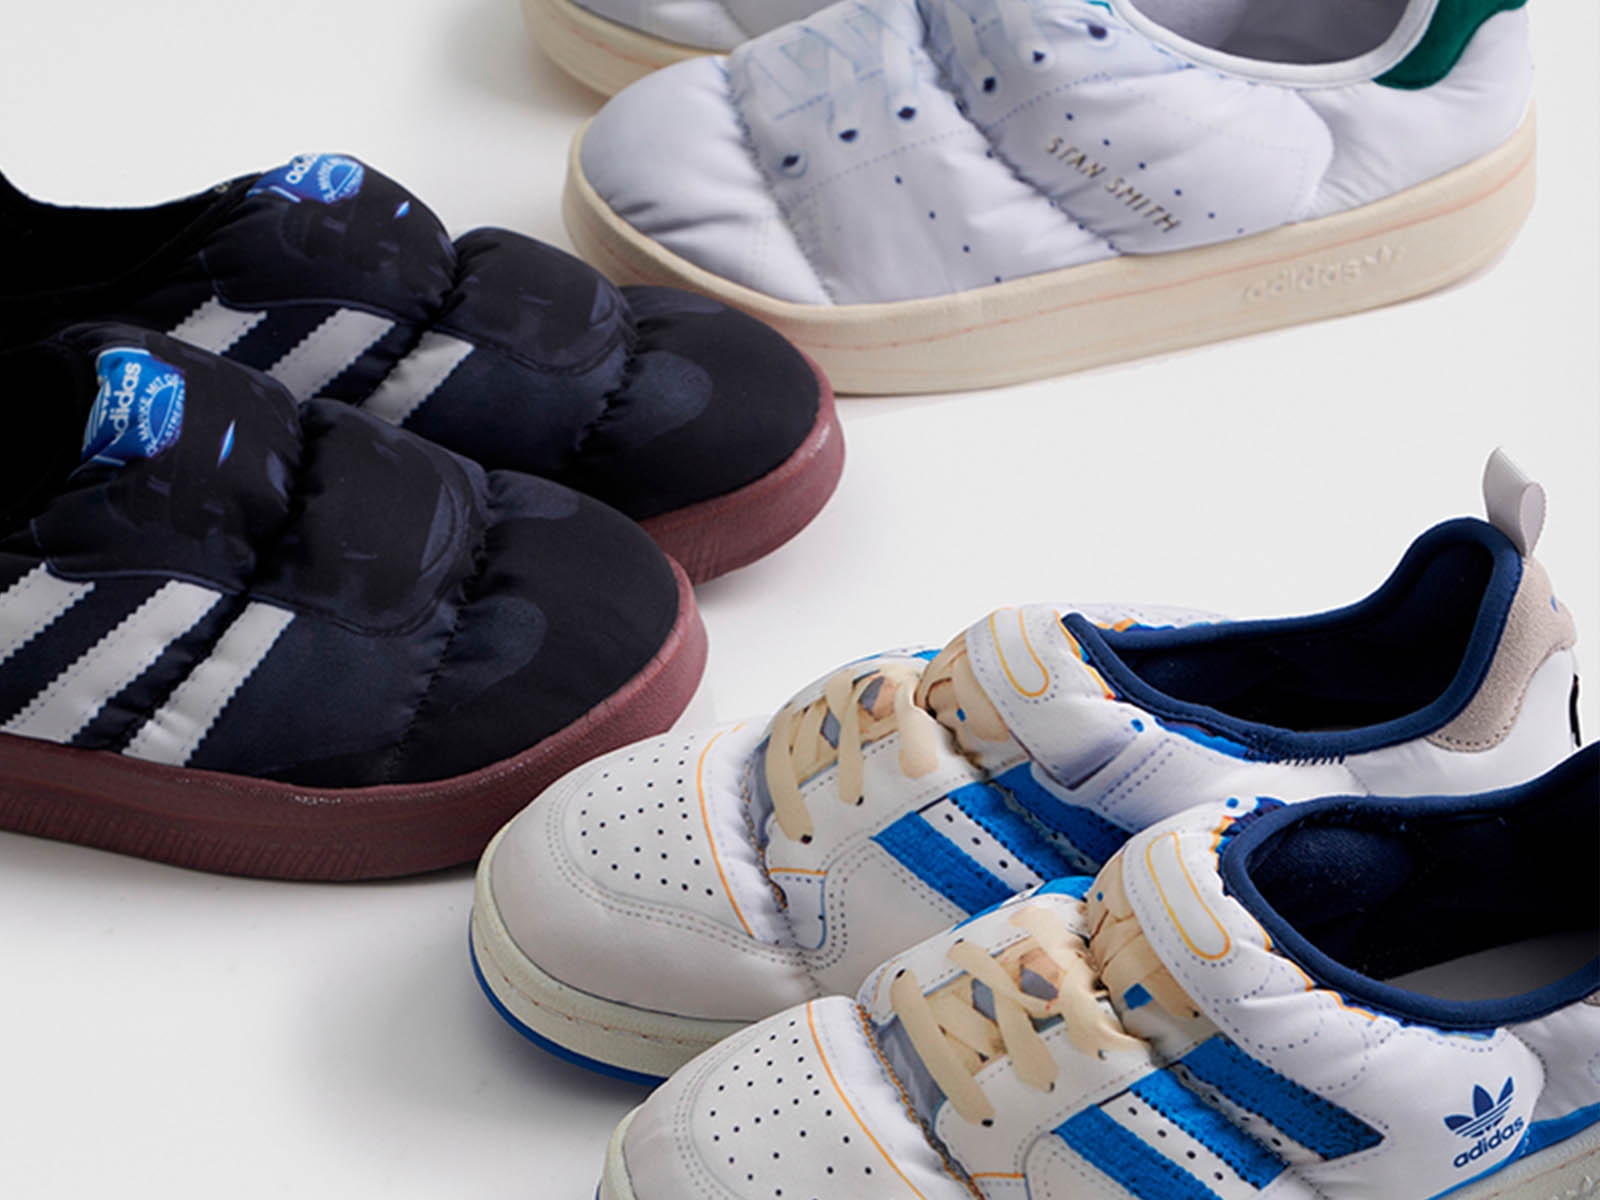 This is the latest puffy release from adidas Originals